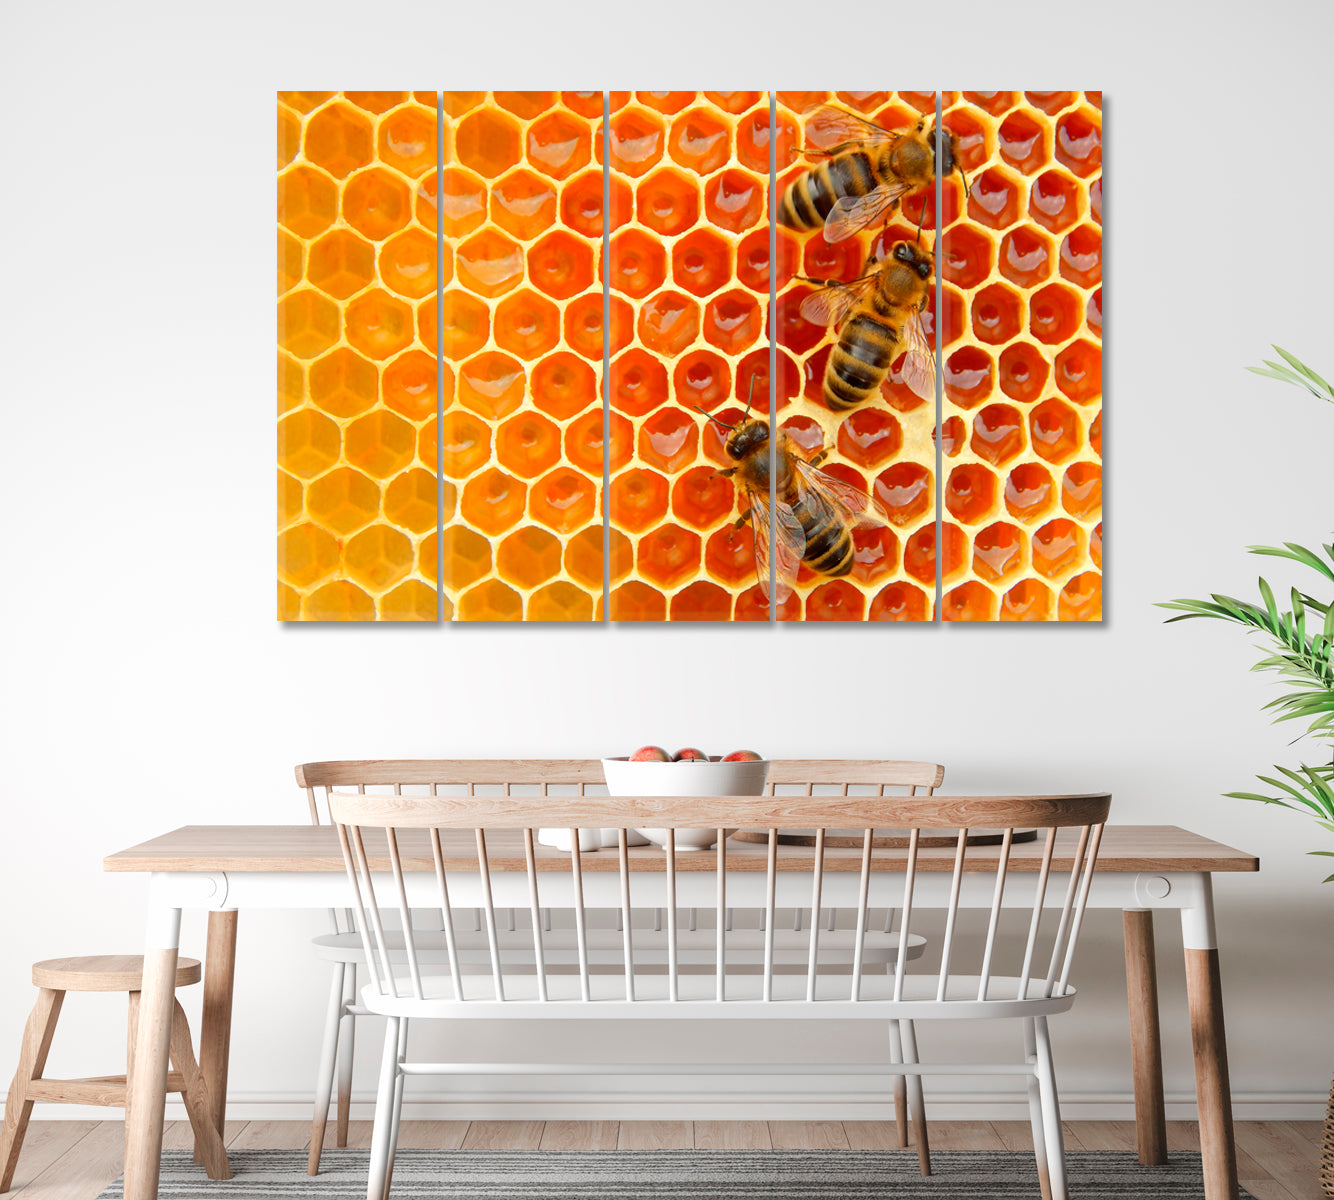 Bees on Honeycombs Canvas Print ArtLexy 5 Panels 36"x24" inches 